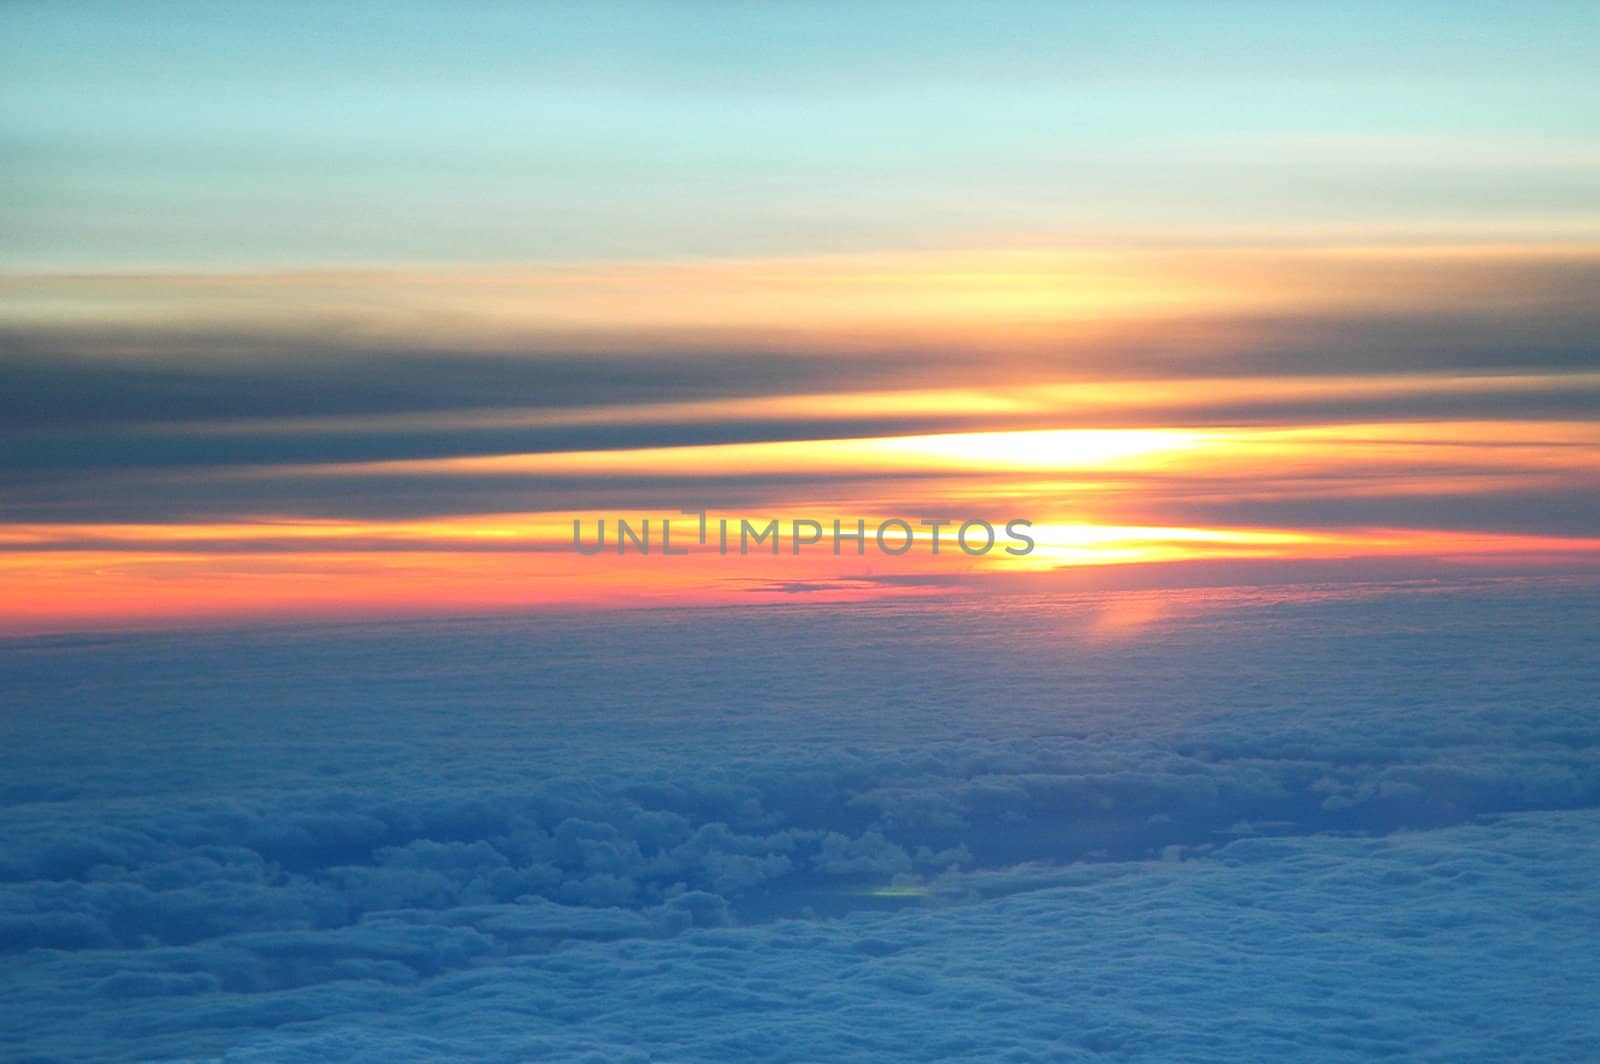 Sunset viewed from the pilot's seat